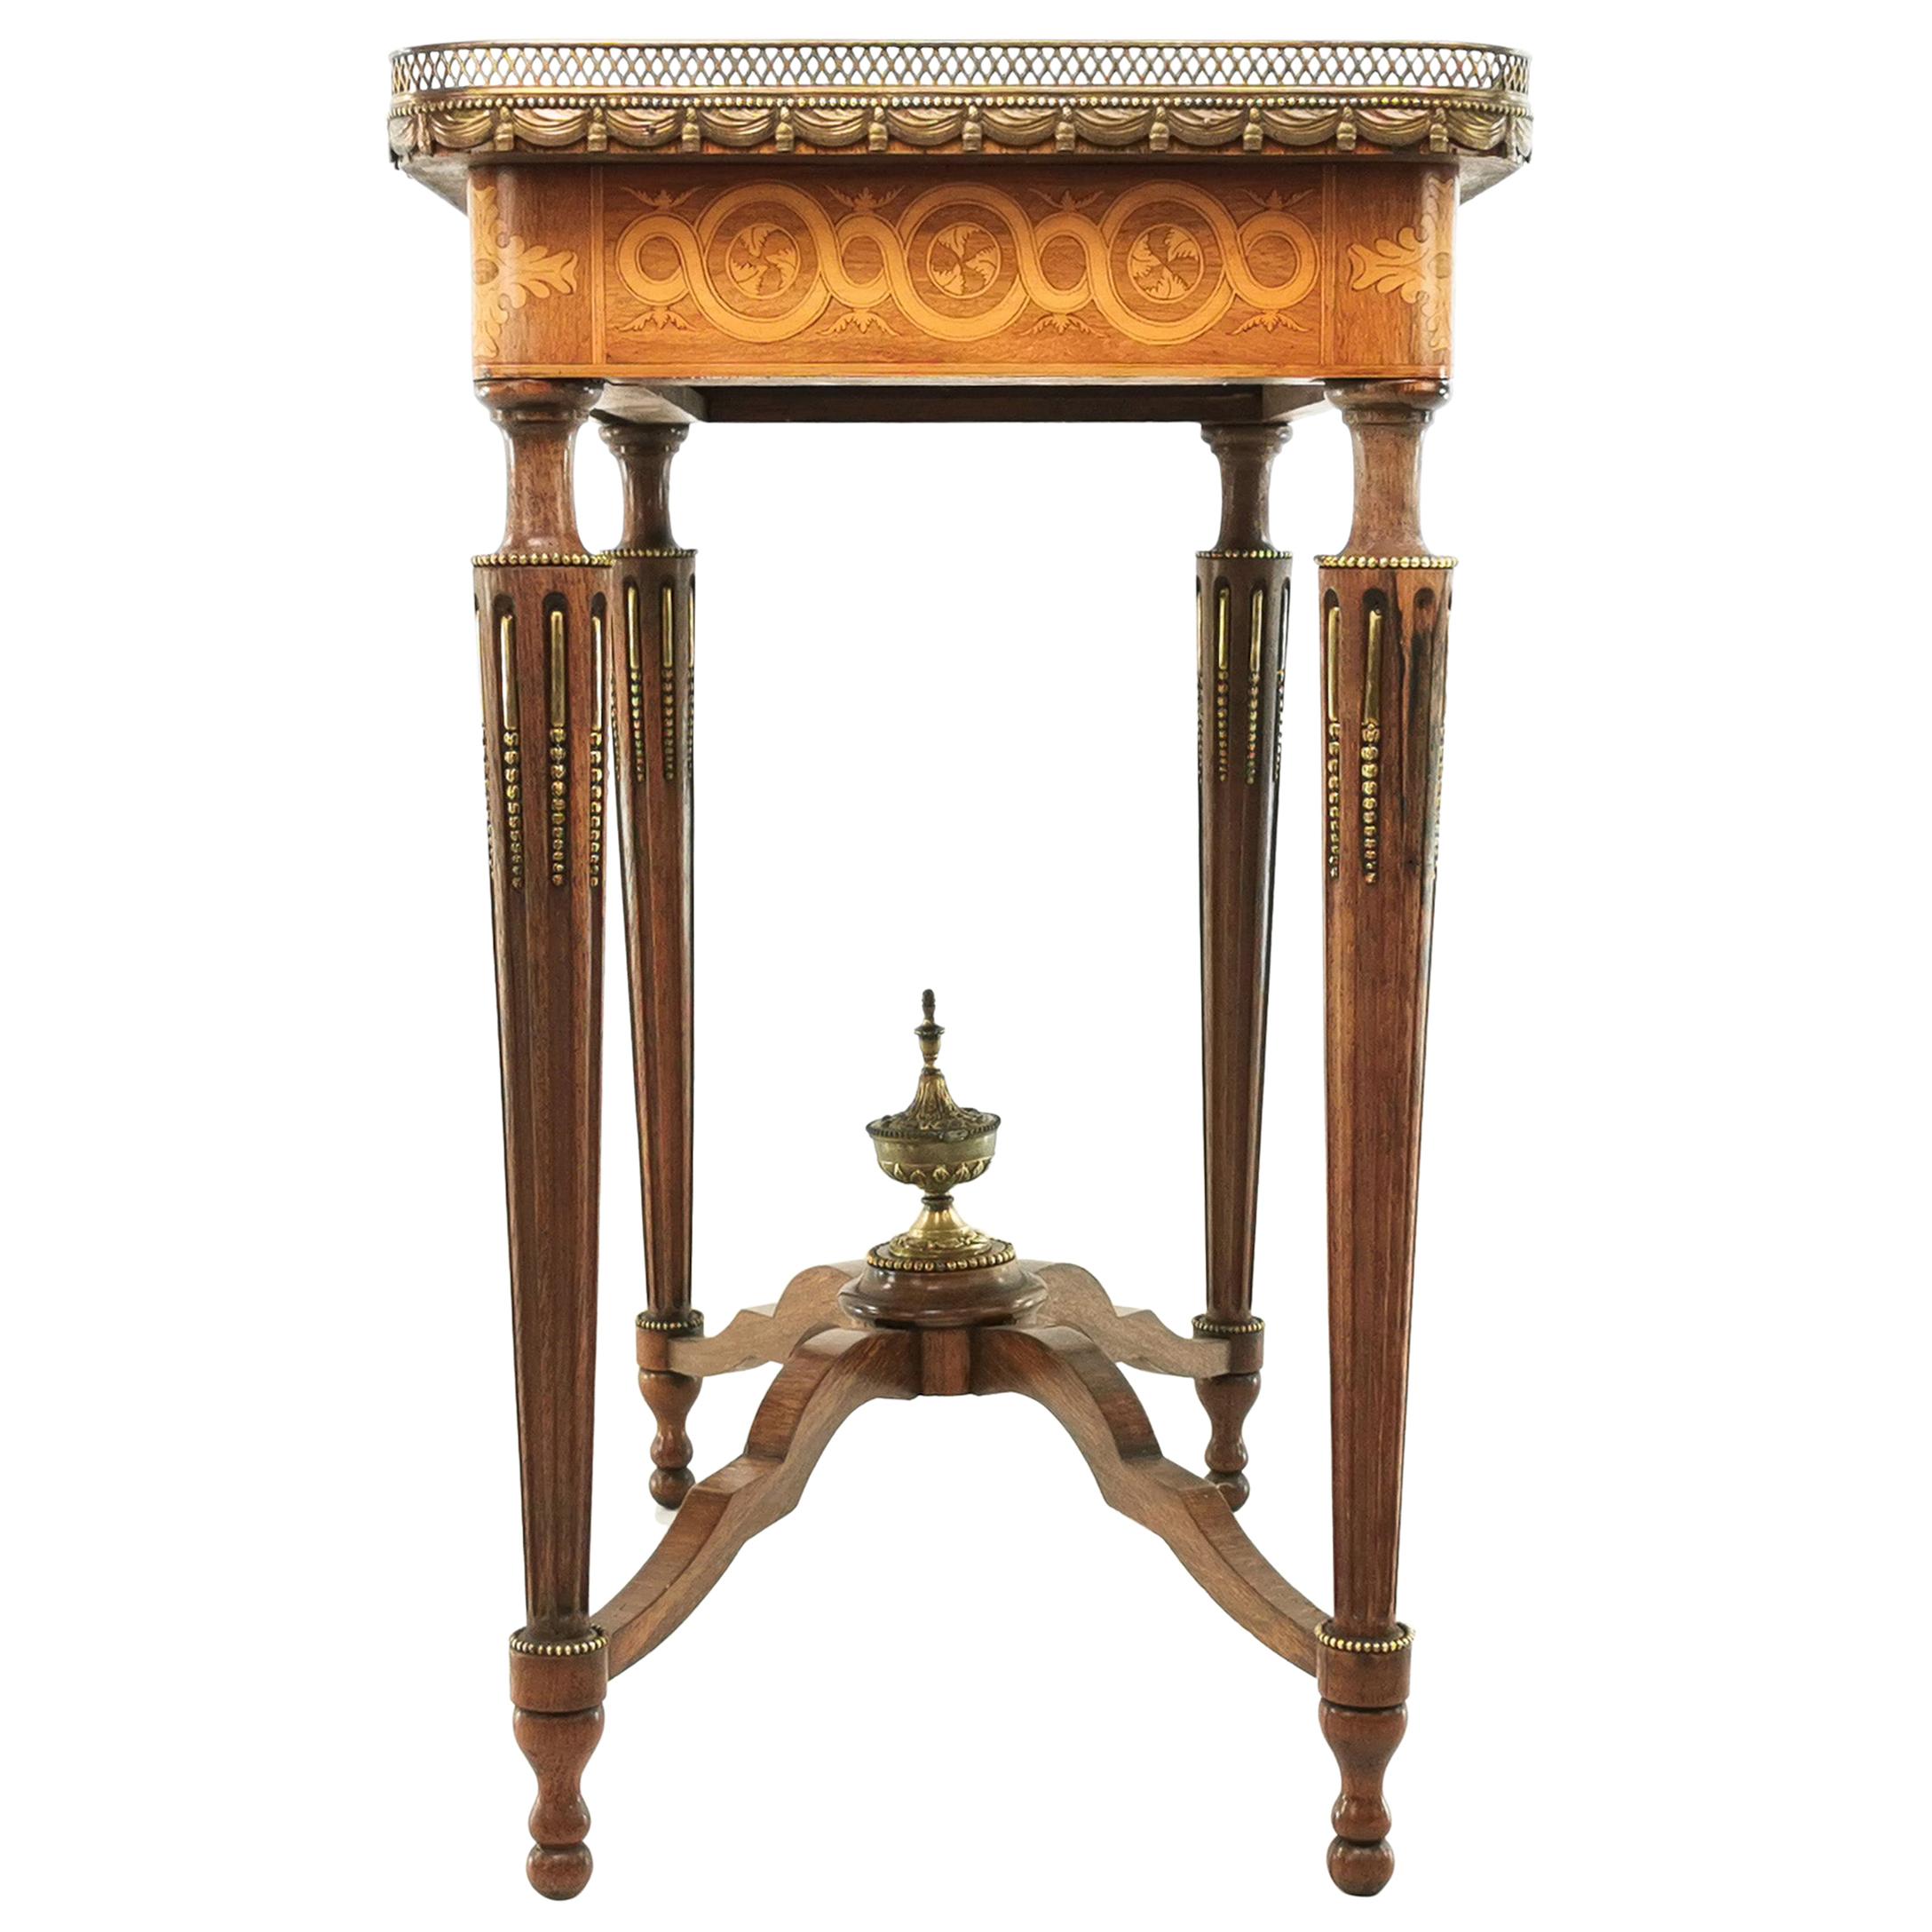 French Louis XVI Style Kingwood and Marquetry Inlaid Side Table